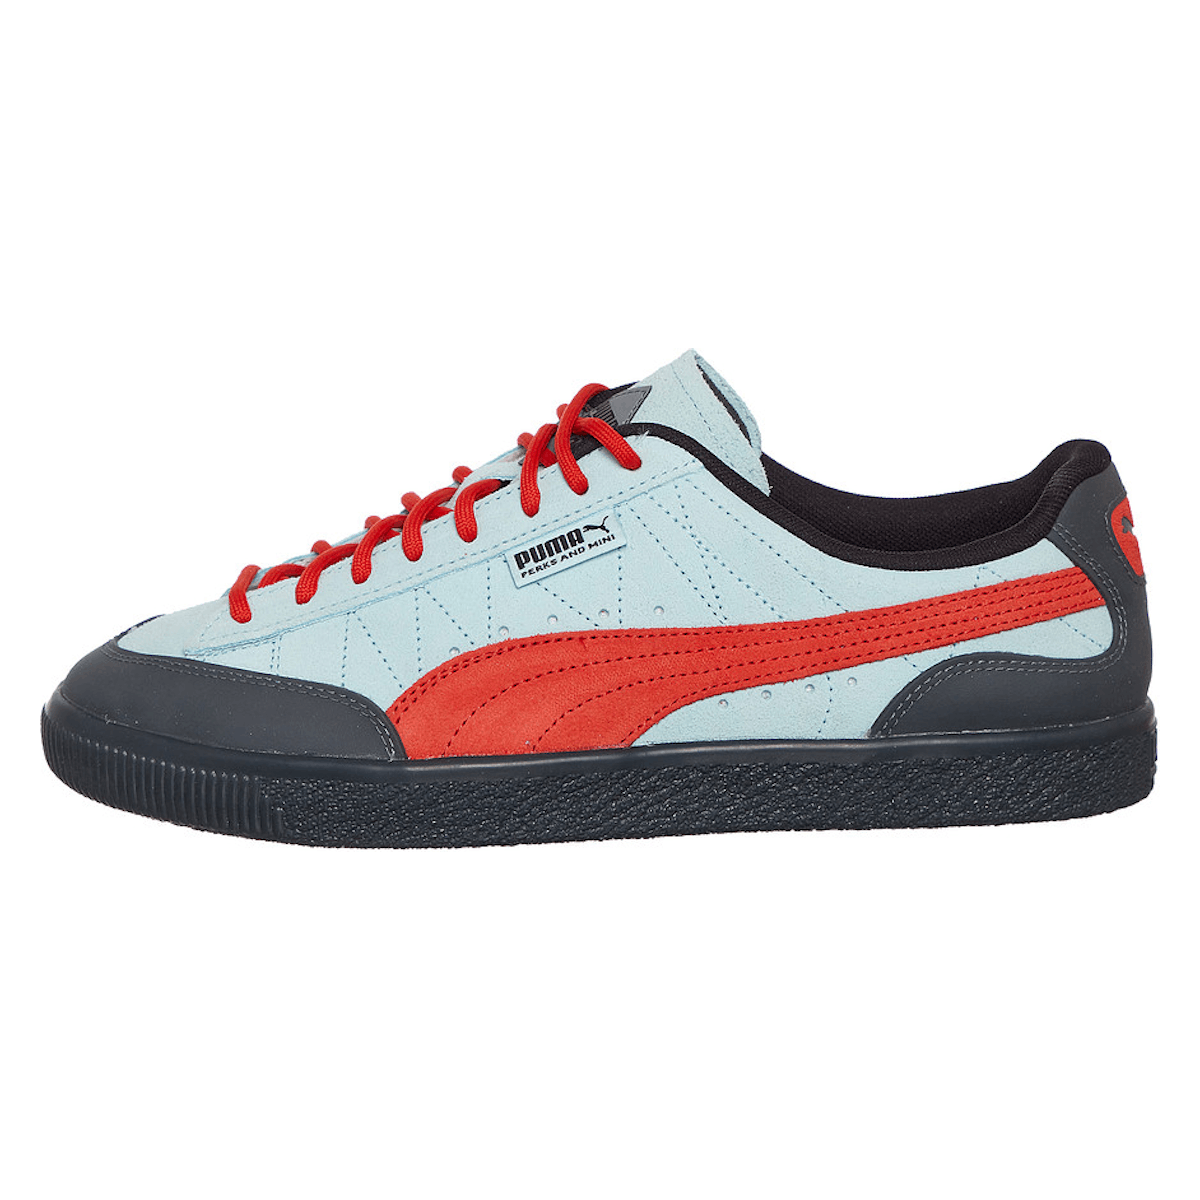 Puma Clyde Rubber Perks and Mini